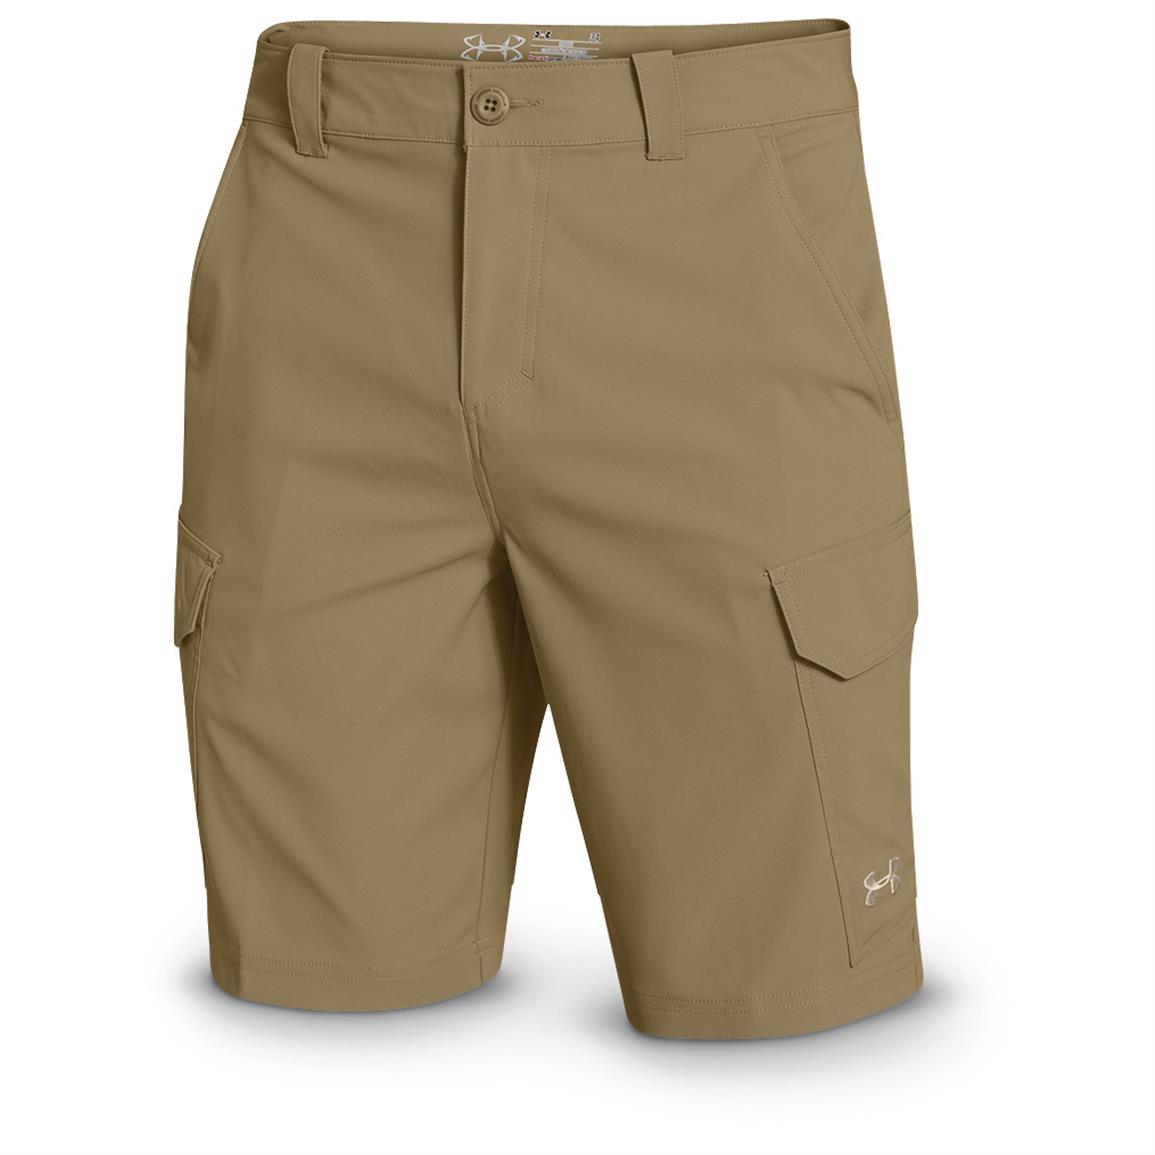 Under Armour Fish Hunter Cargo Shorts - 619642, Shorts at Sportsman's Guide